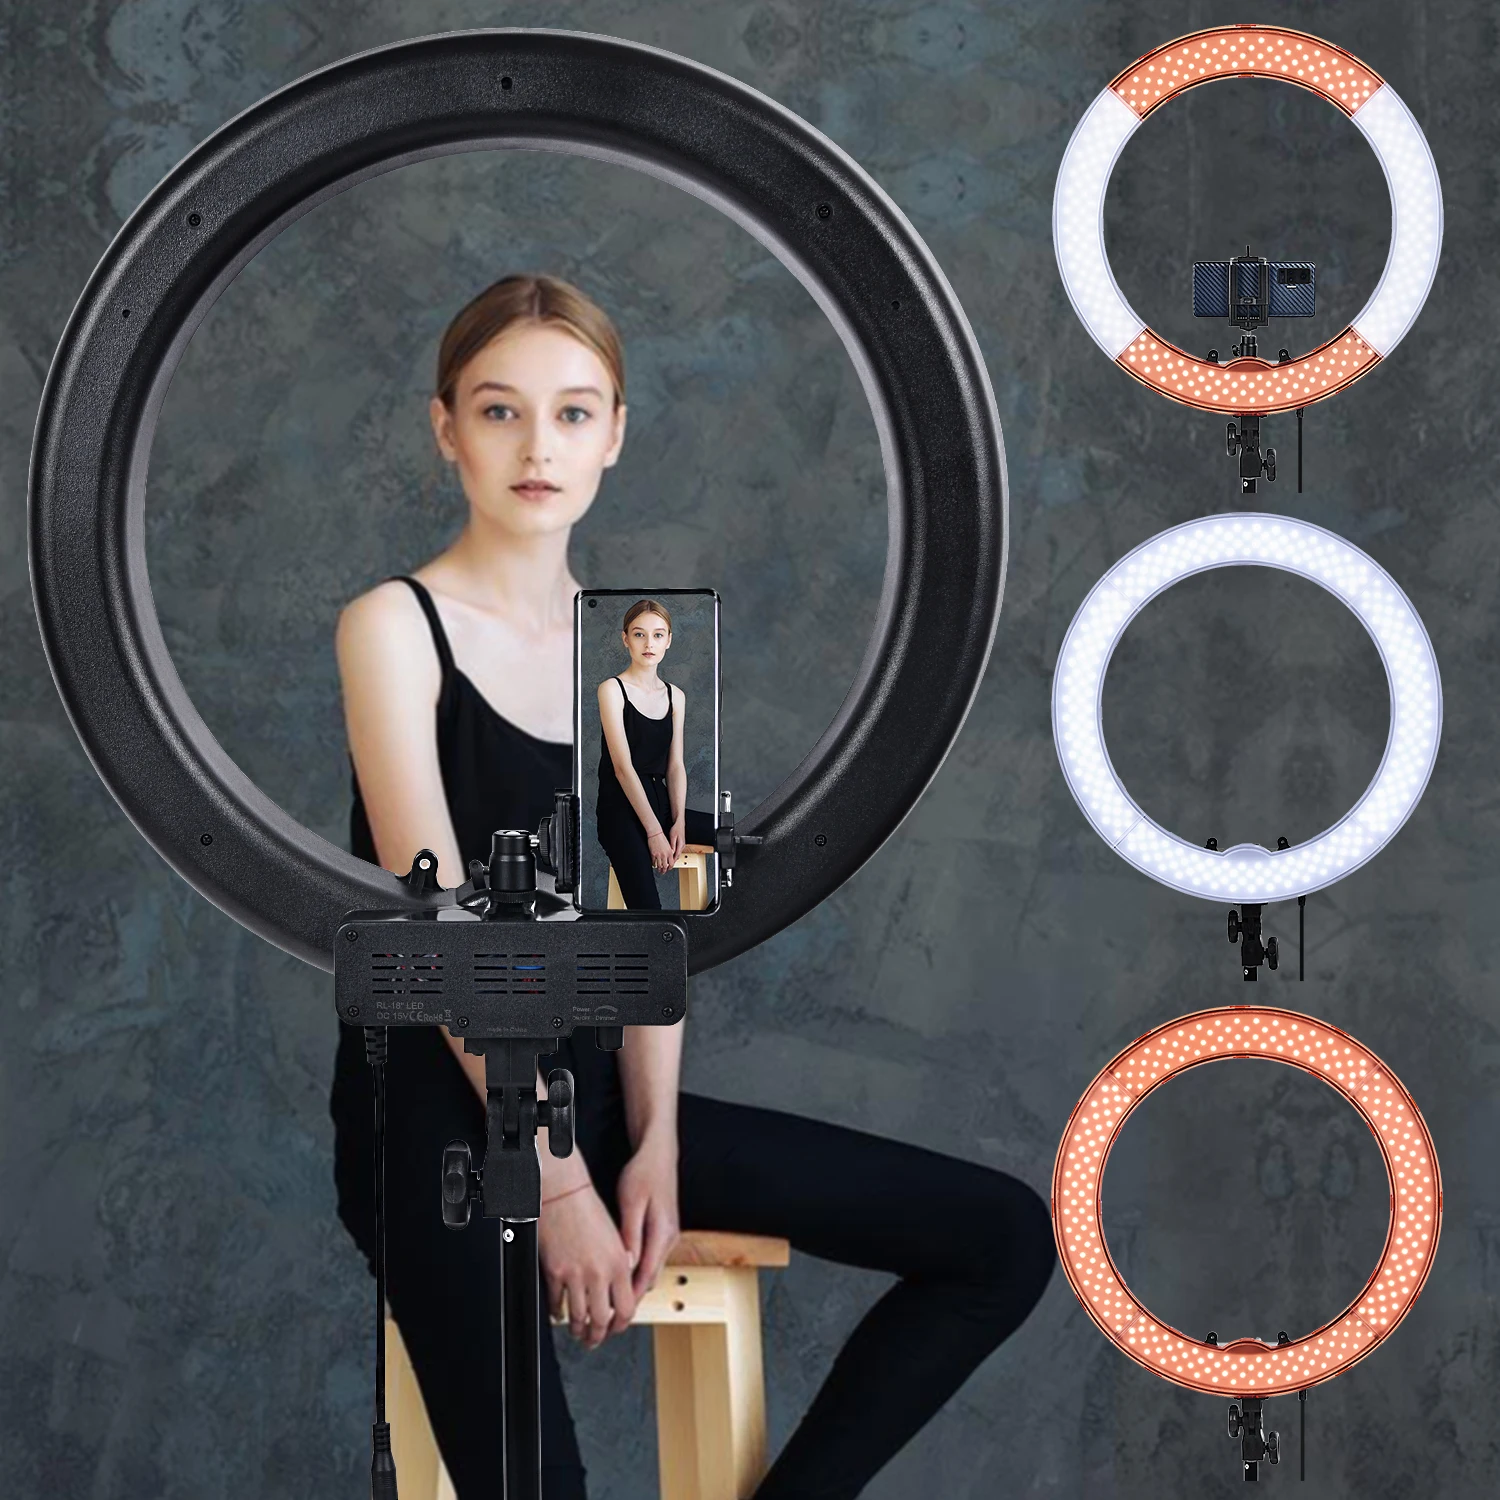 

FOSOTO RL-18 18 Inch led Ring Light Photography light Selfie Ring Lamp With Tripod Stand For Makeup Youtube Tik tok Ringlight, Black